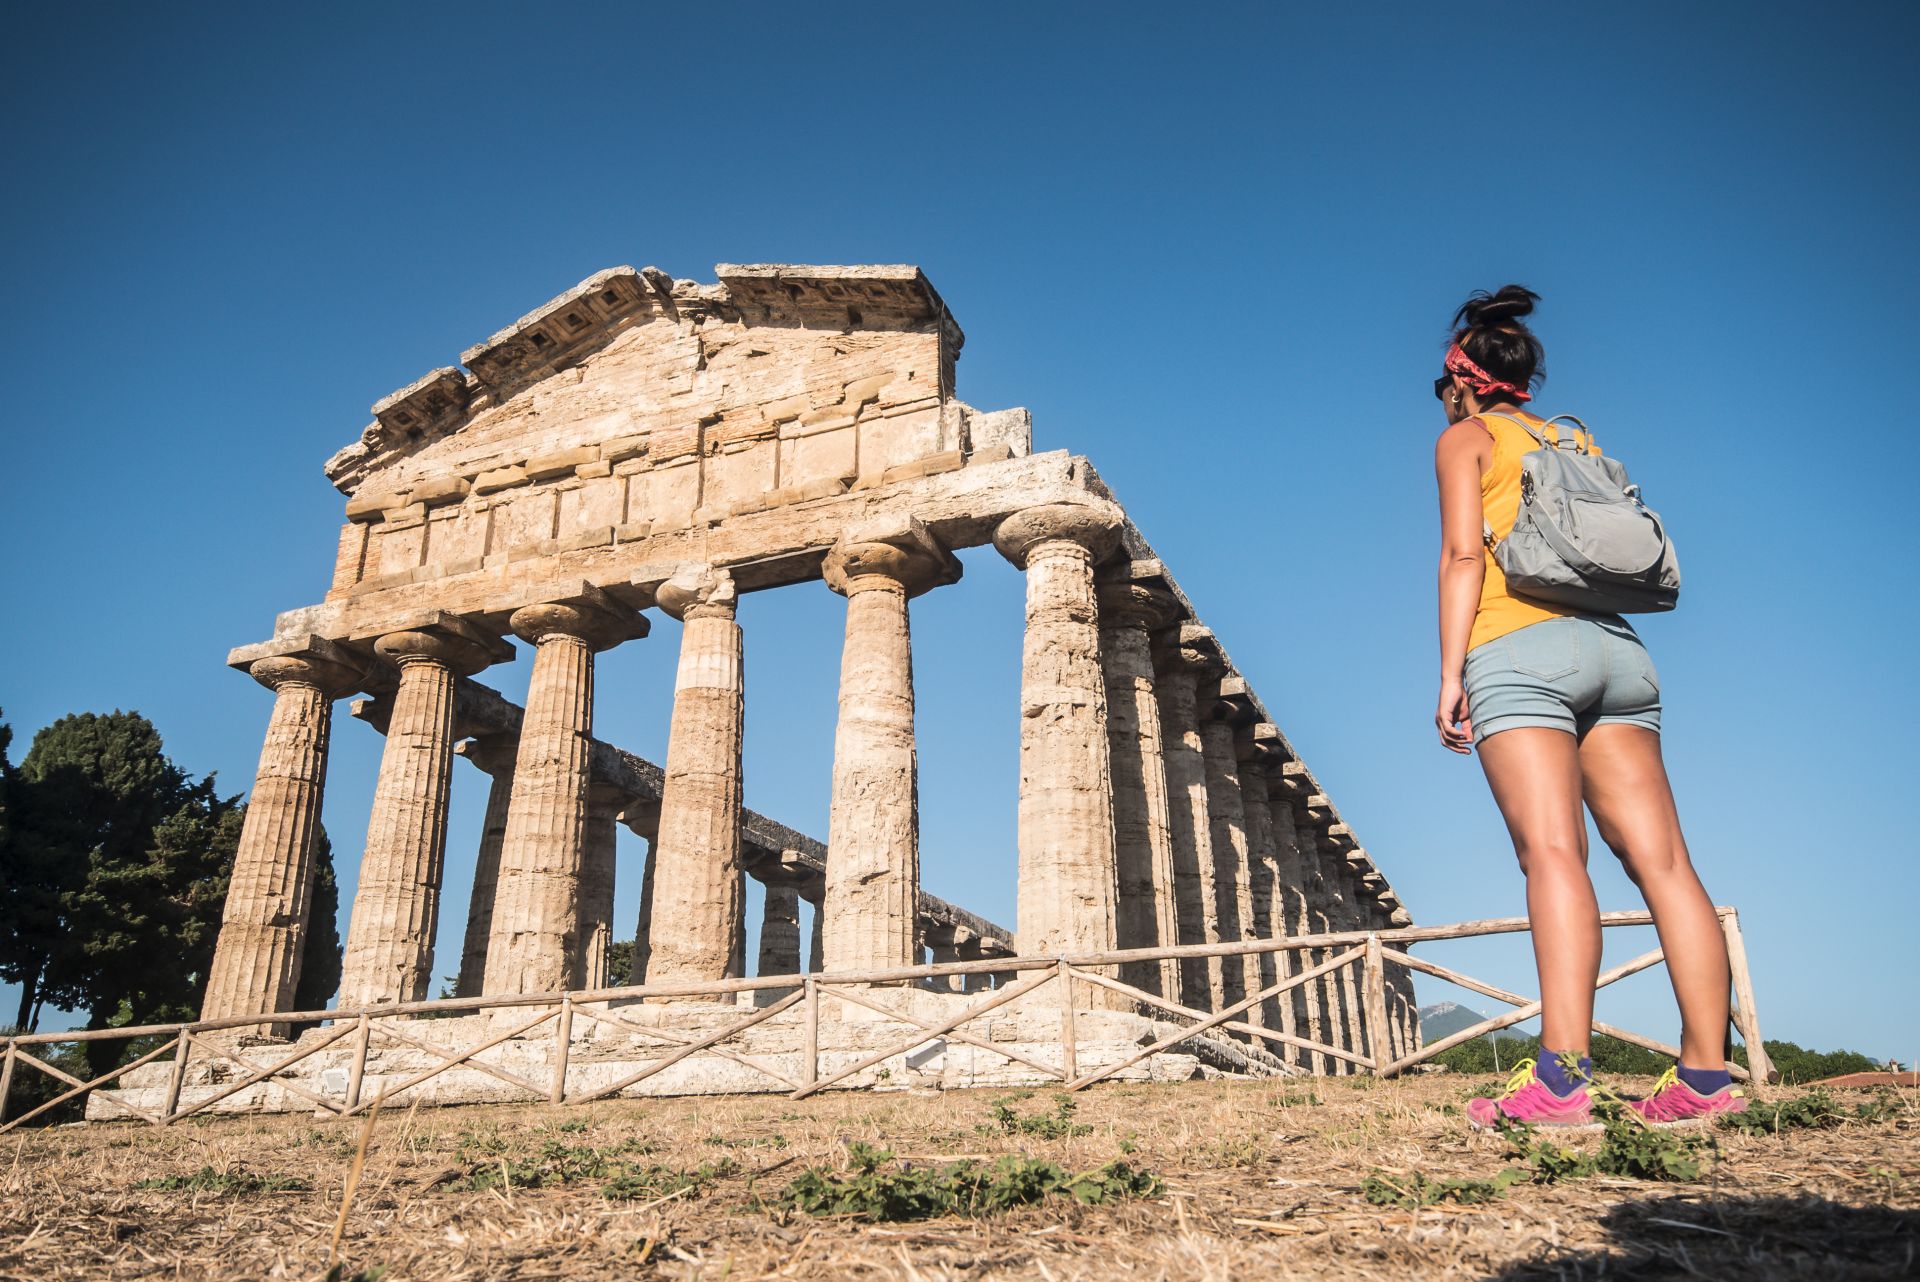 Woman-contemplating-a-temple-at-the-greco-roman-archaeological-site-of-Paestum-Italy